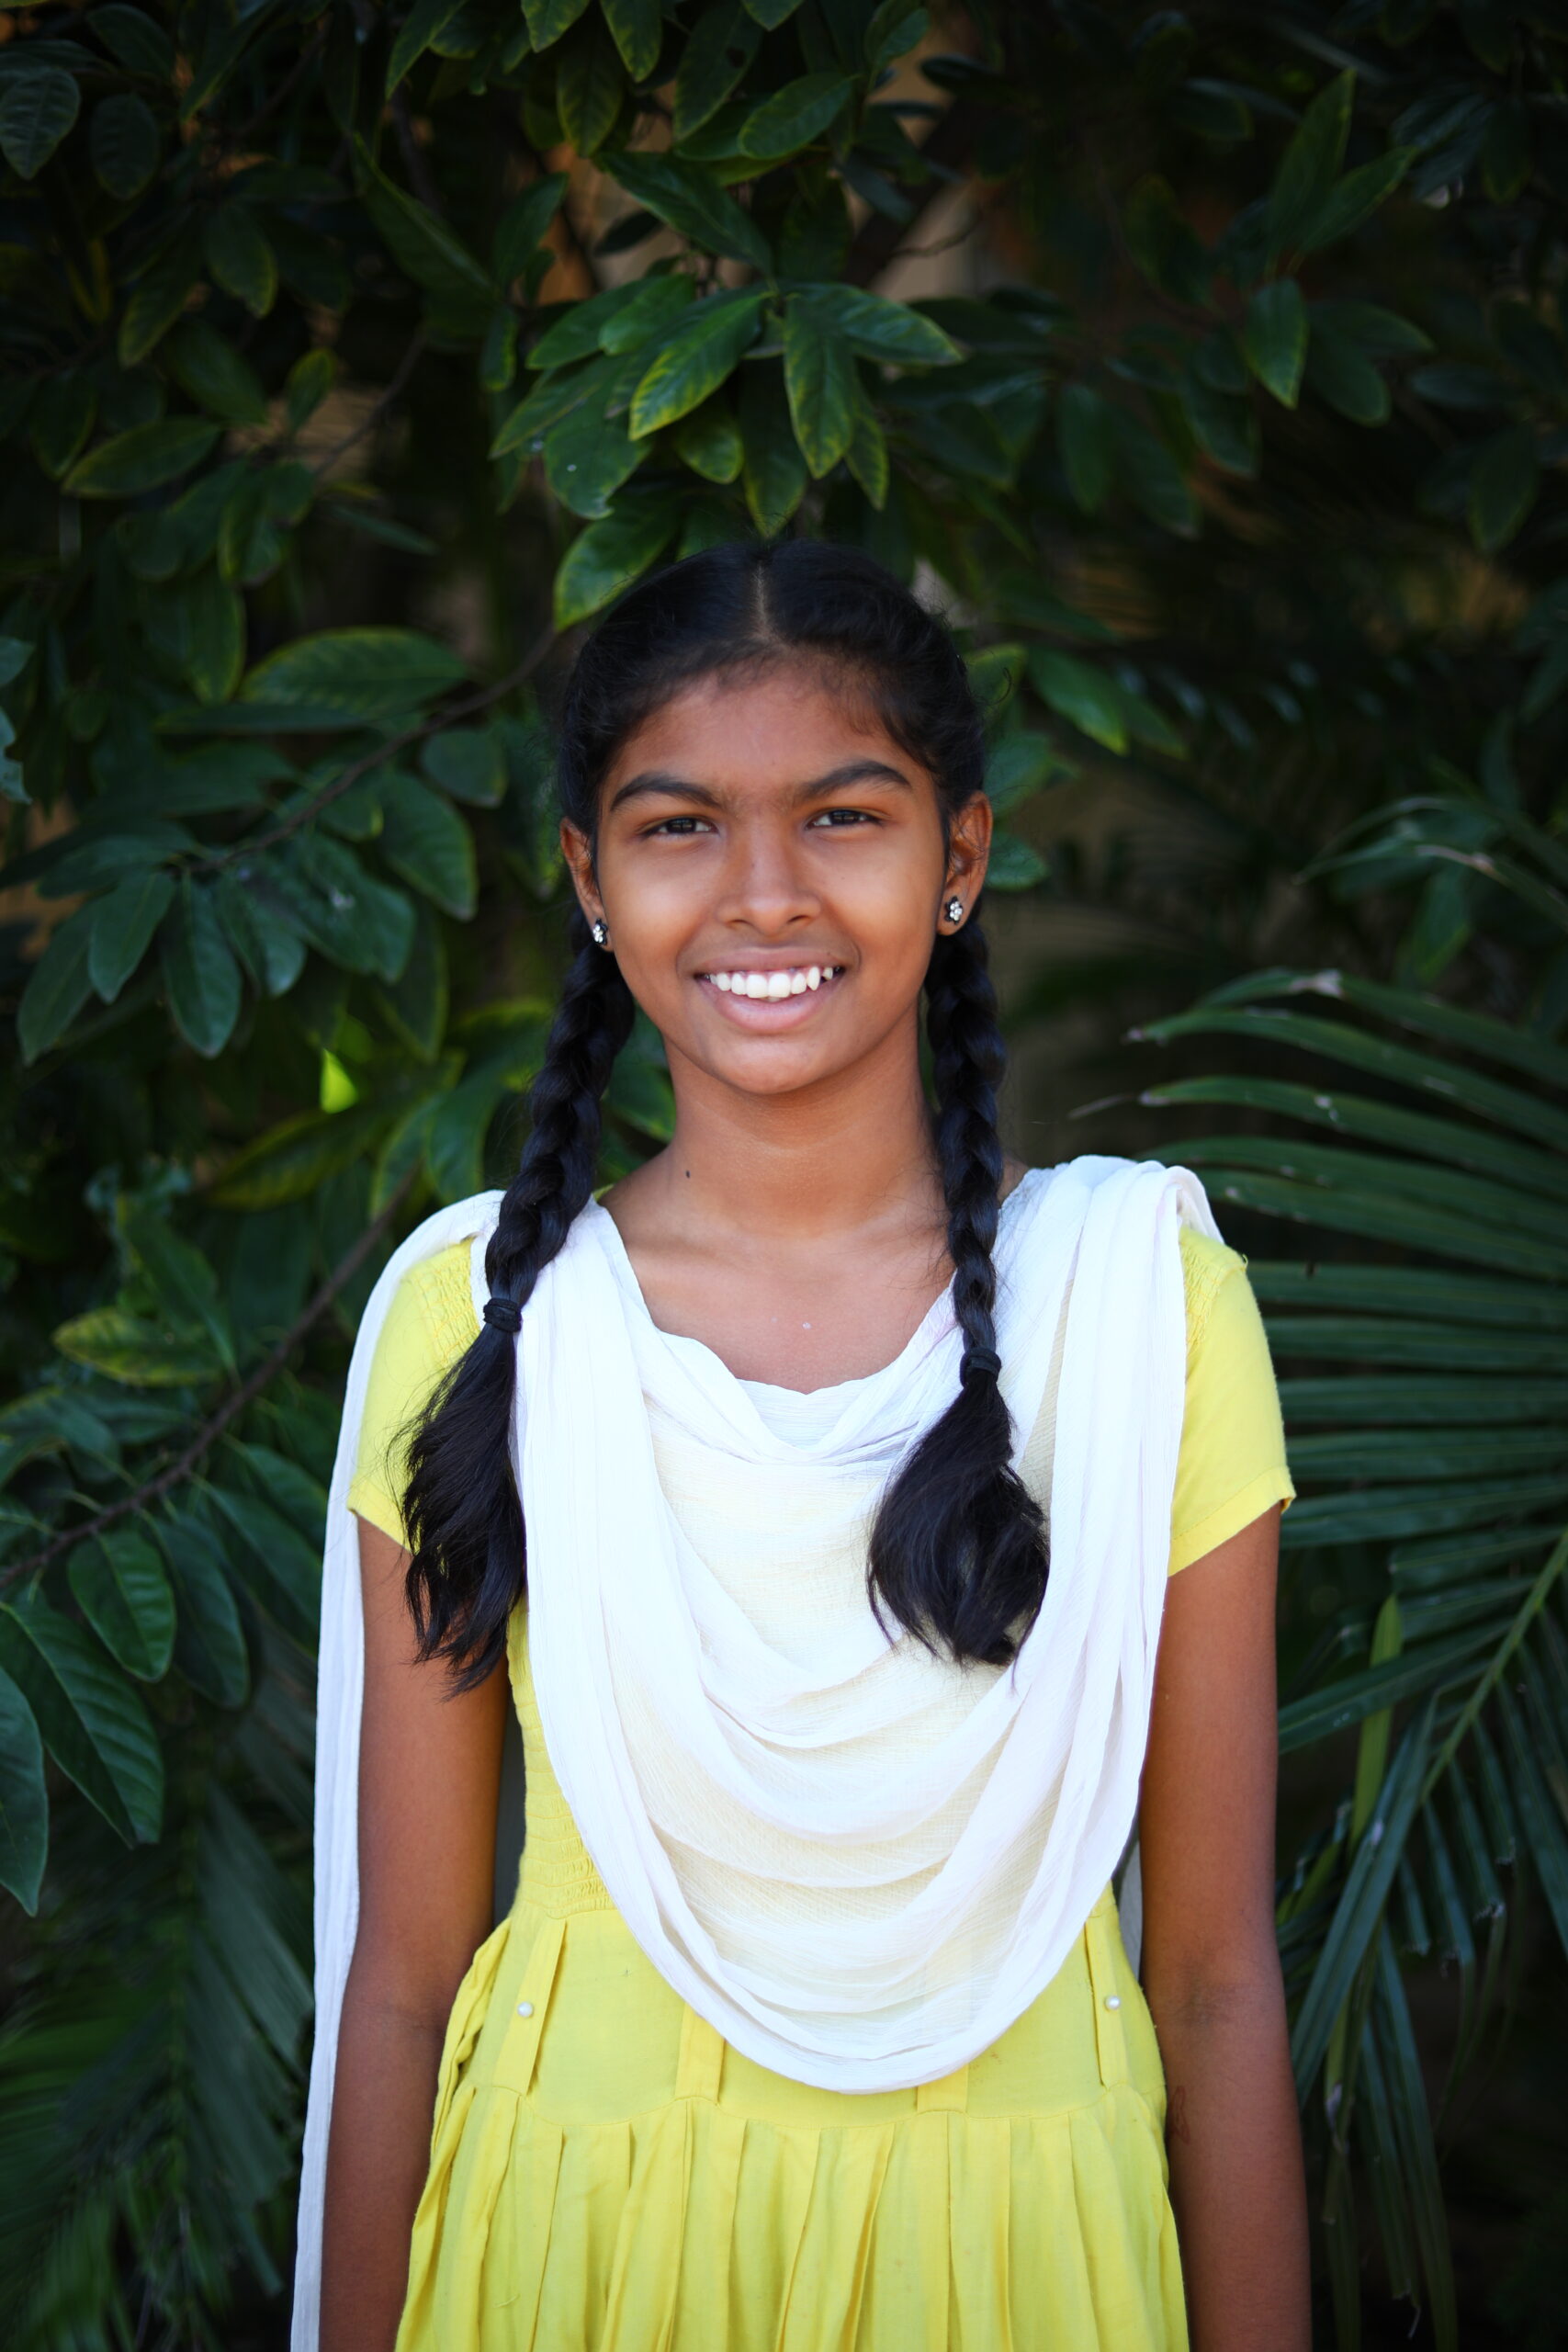 A young girl in India at the Children of Faith Home